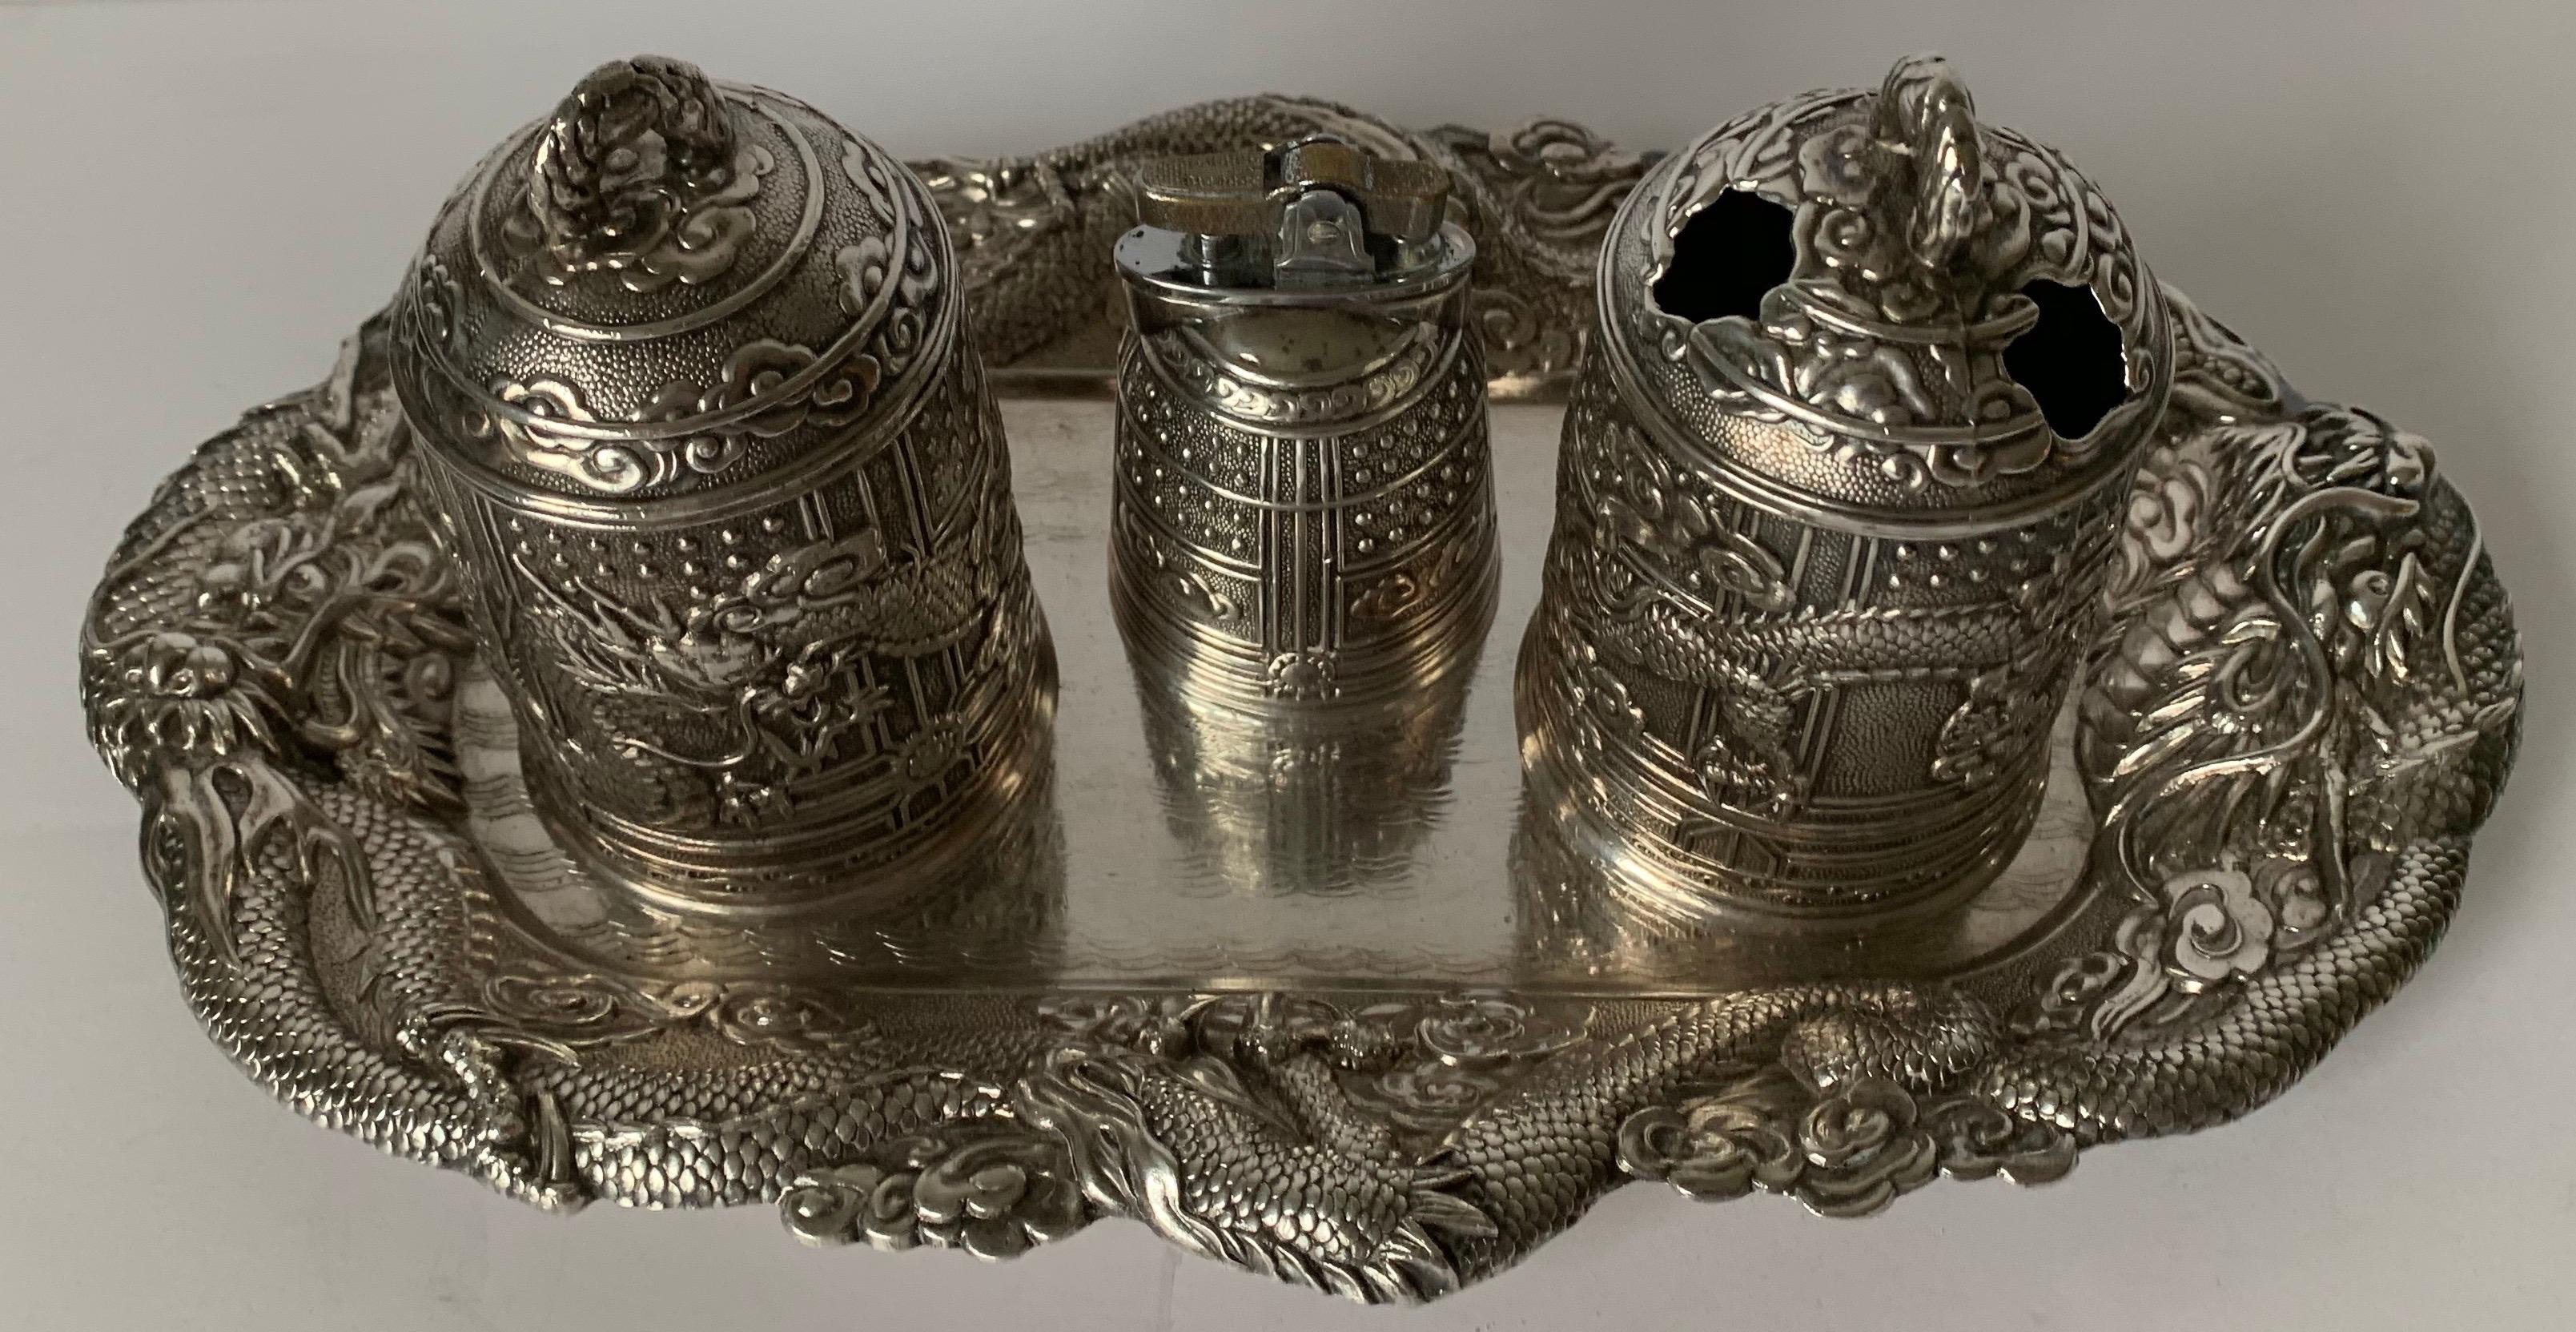 Chinese export style Japanese silver plate smoking set. Three pieces plus tray. Tray is stamped on the underside. Tray is 12” wide x 7” deep.